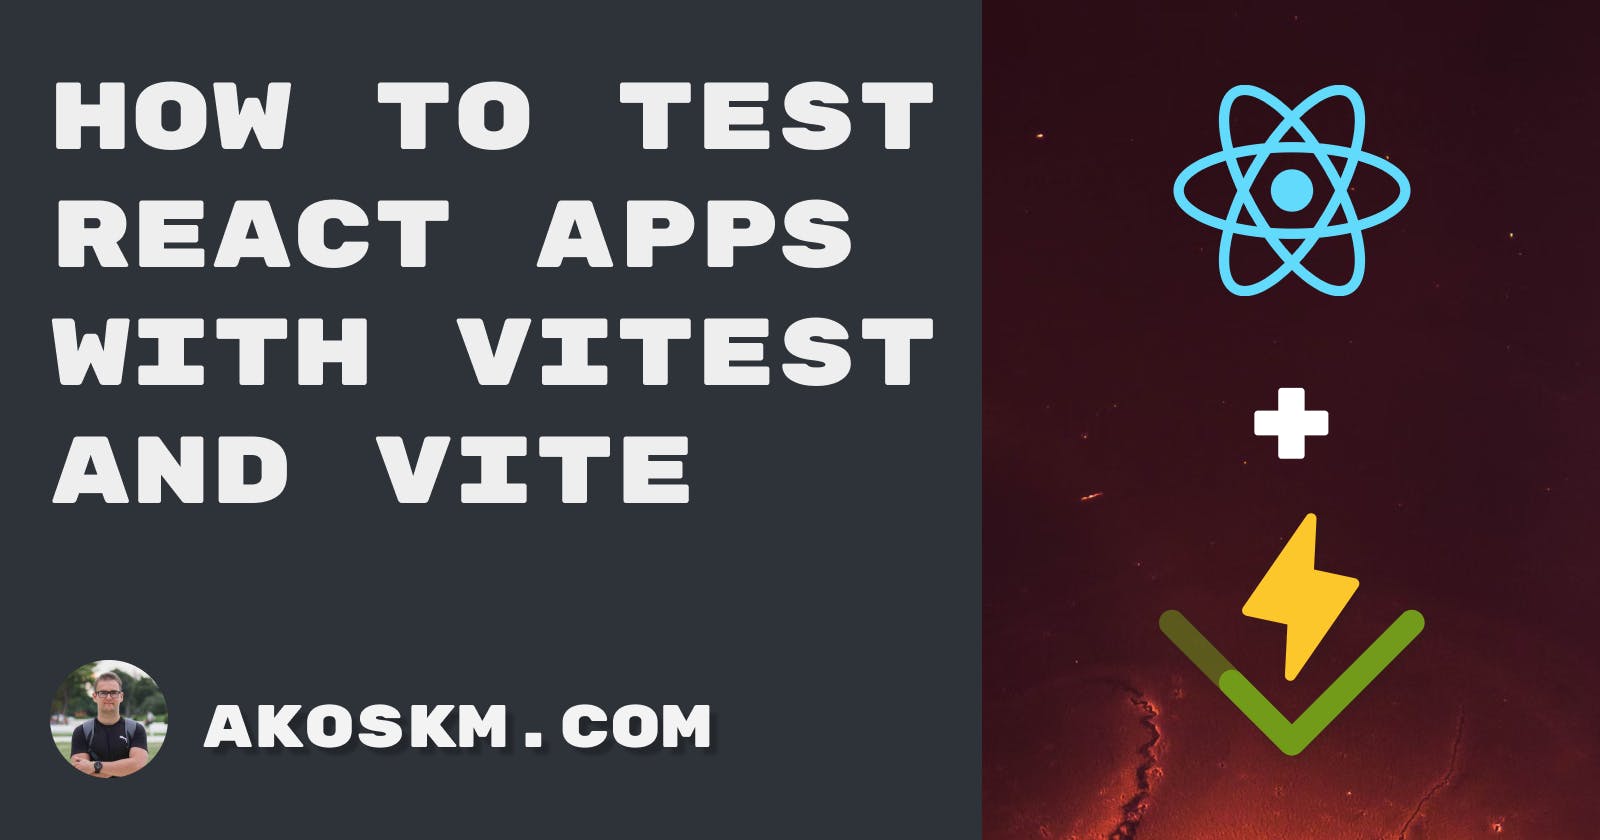 How to test React apps with Vitest and Vite